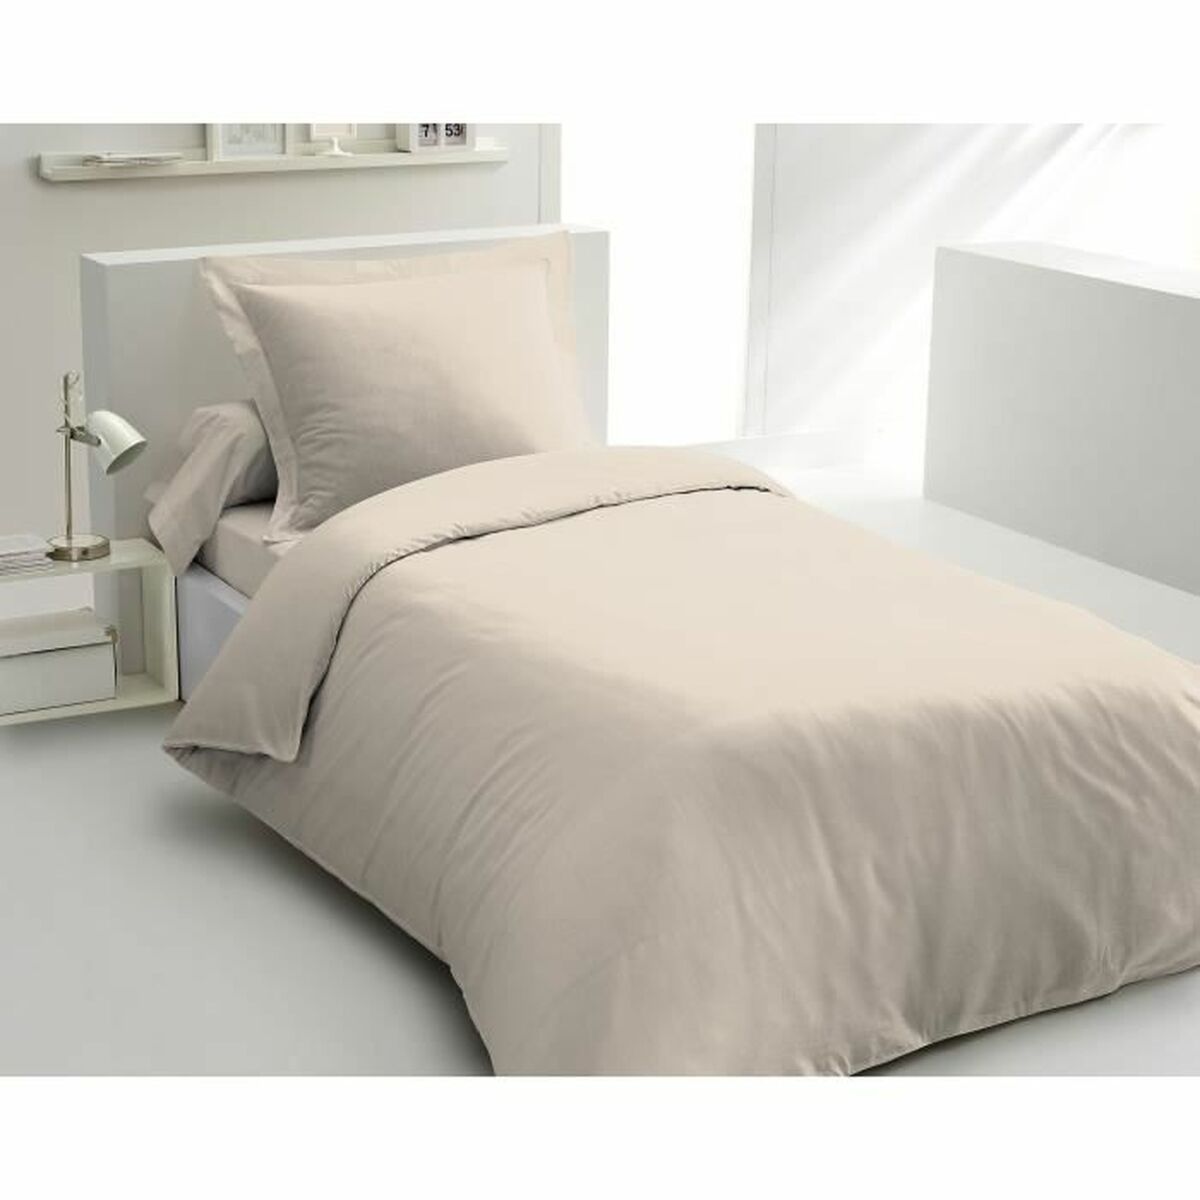 Fitted sheet Lovely Home Beige Cream 140 x 200 cm